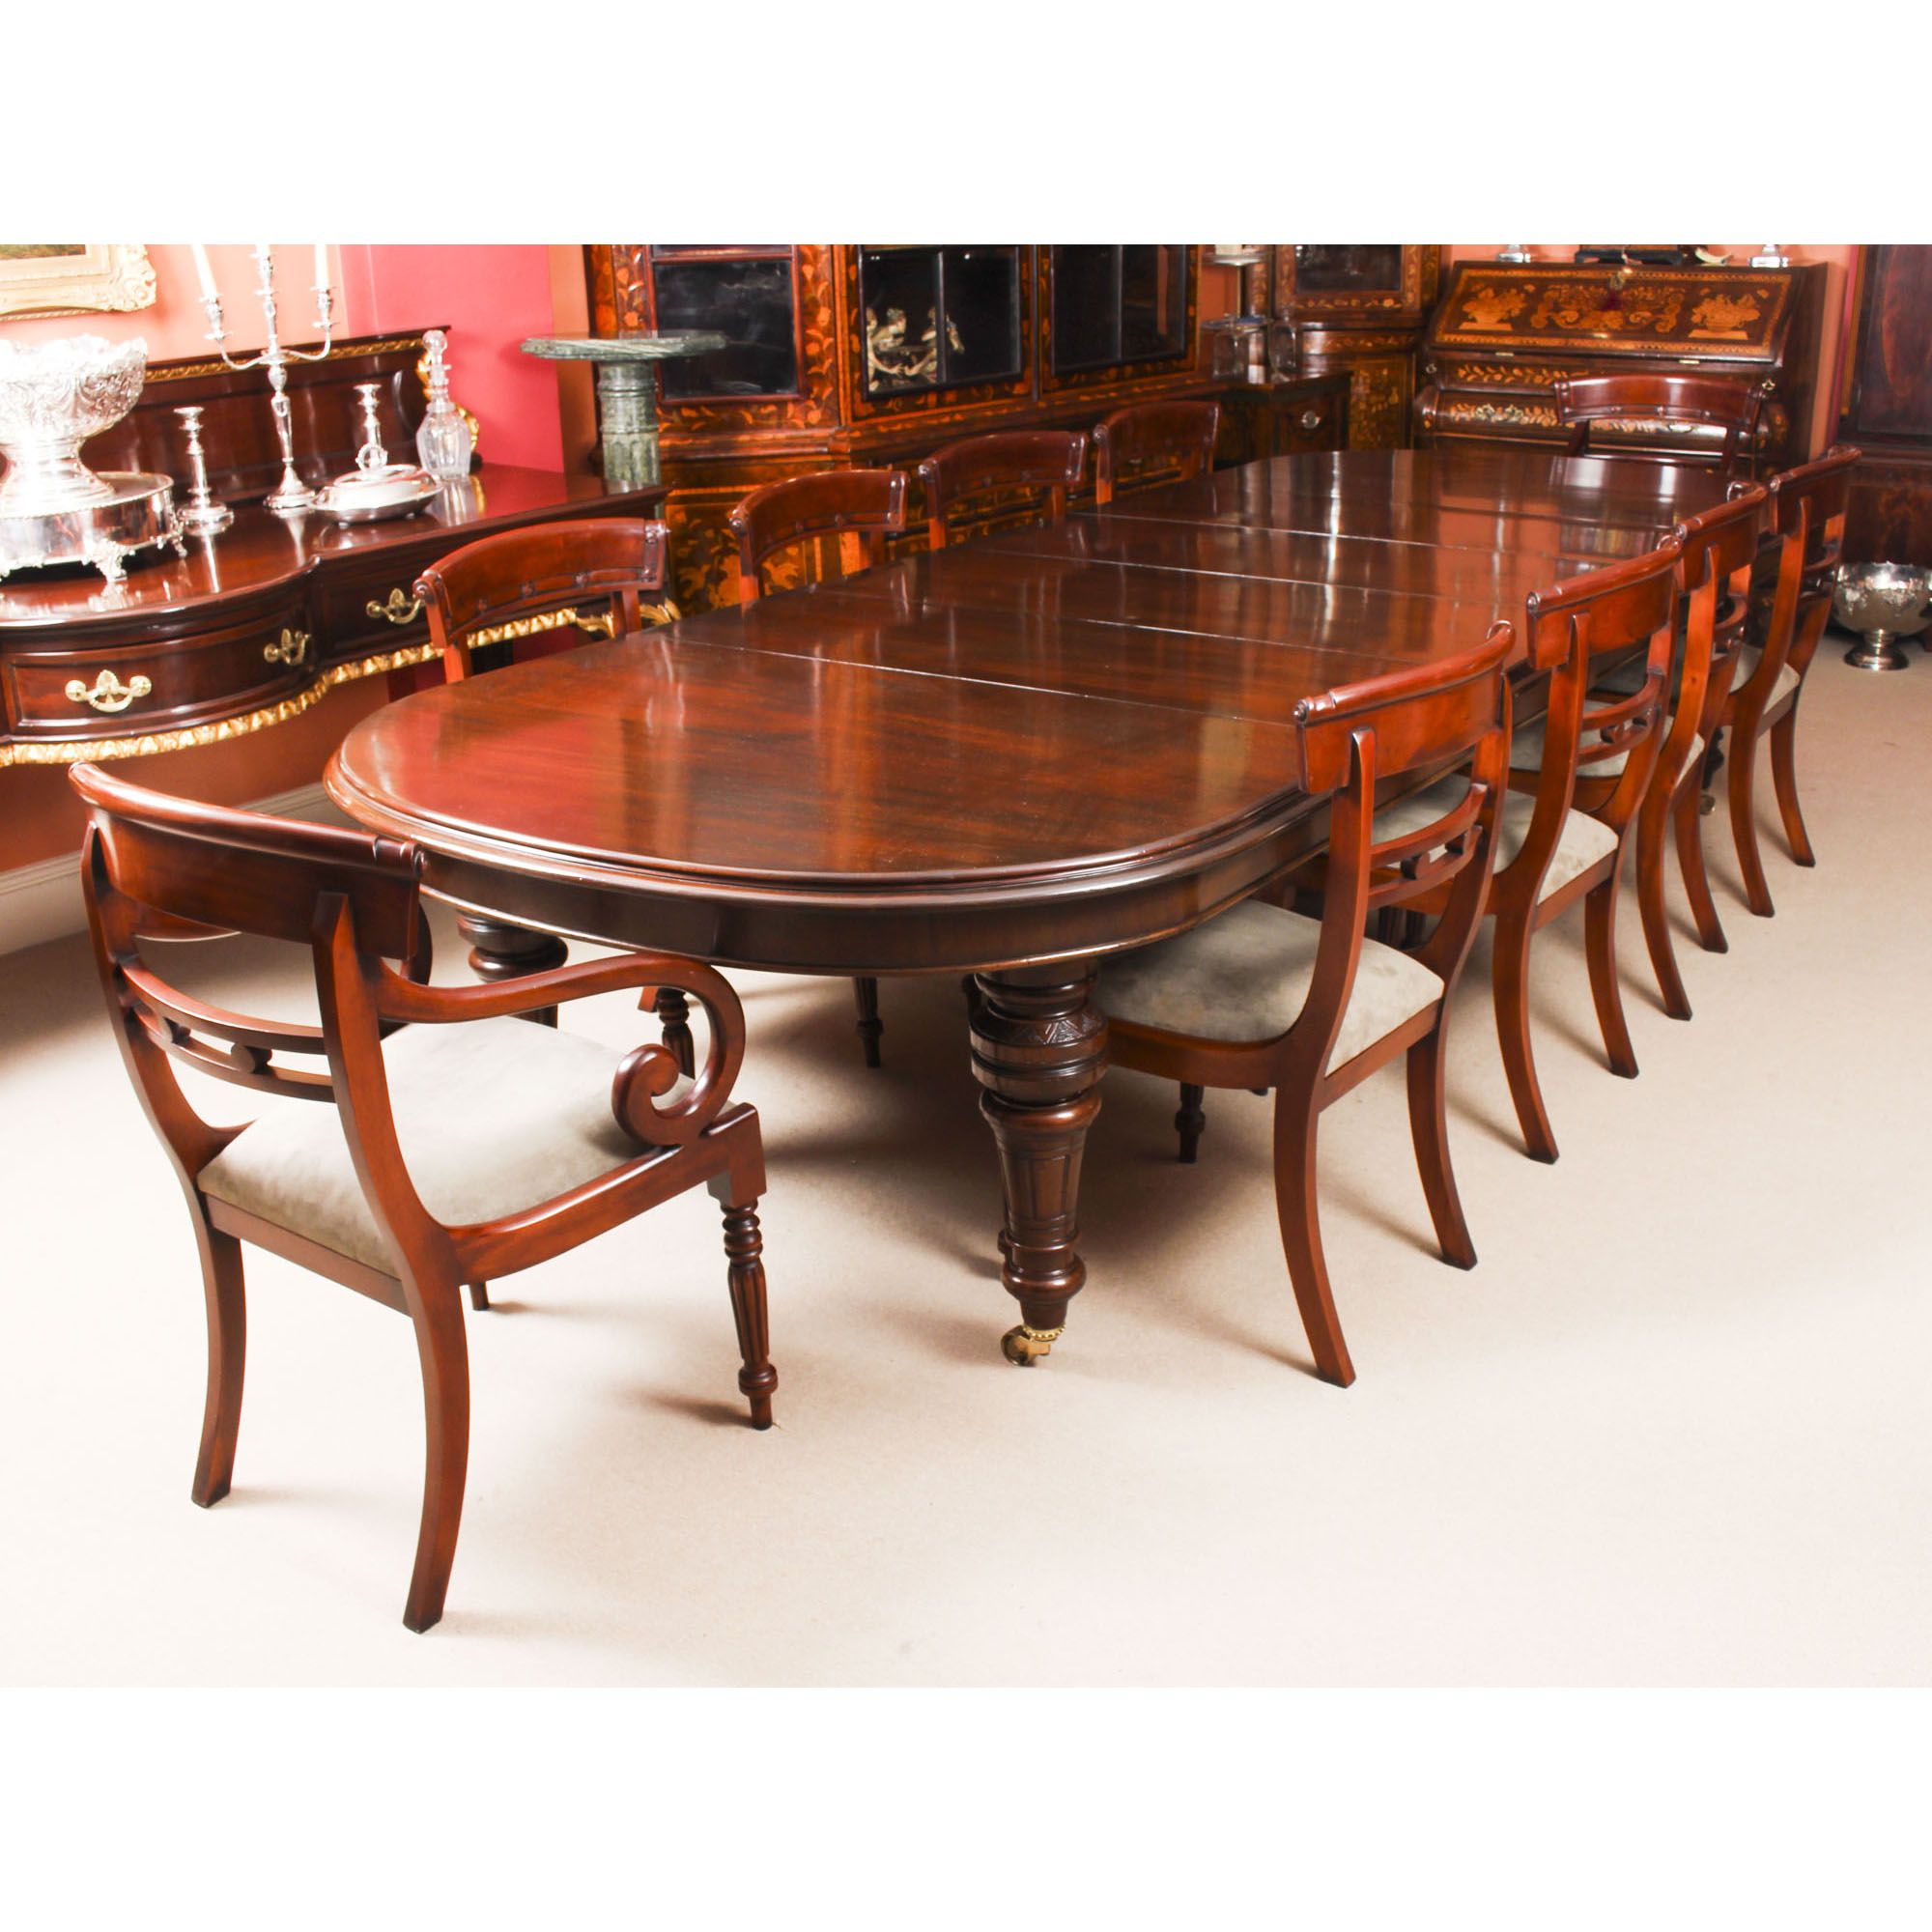 Antique Victorian Mahogany Dining Table C1870 & 10 Chairs Inside Most Recent Rustic Mahogany Extending Dining Tables (View 14 of 25)